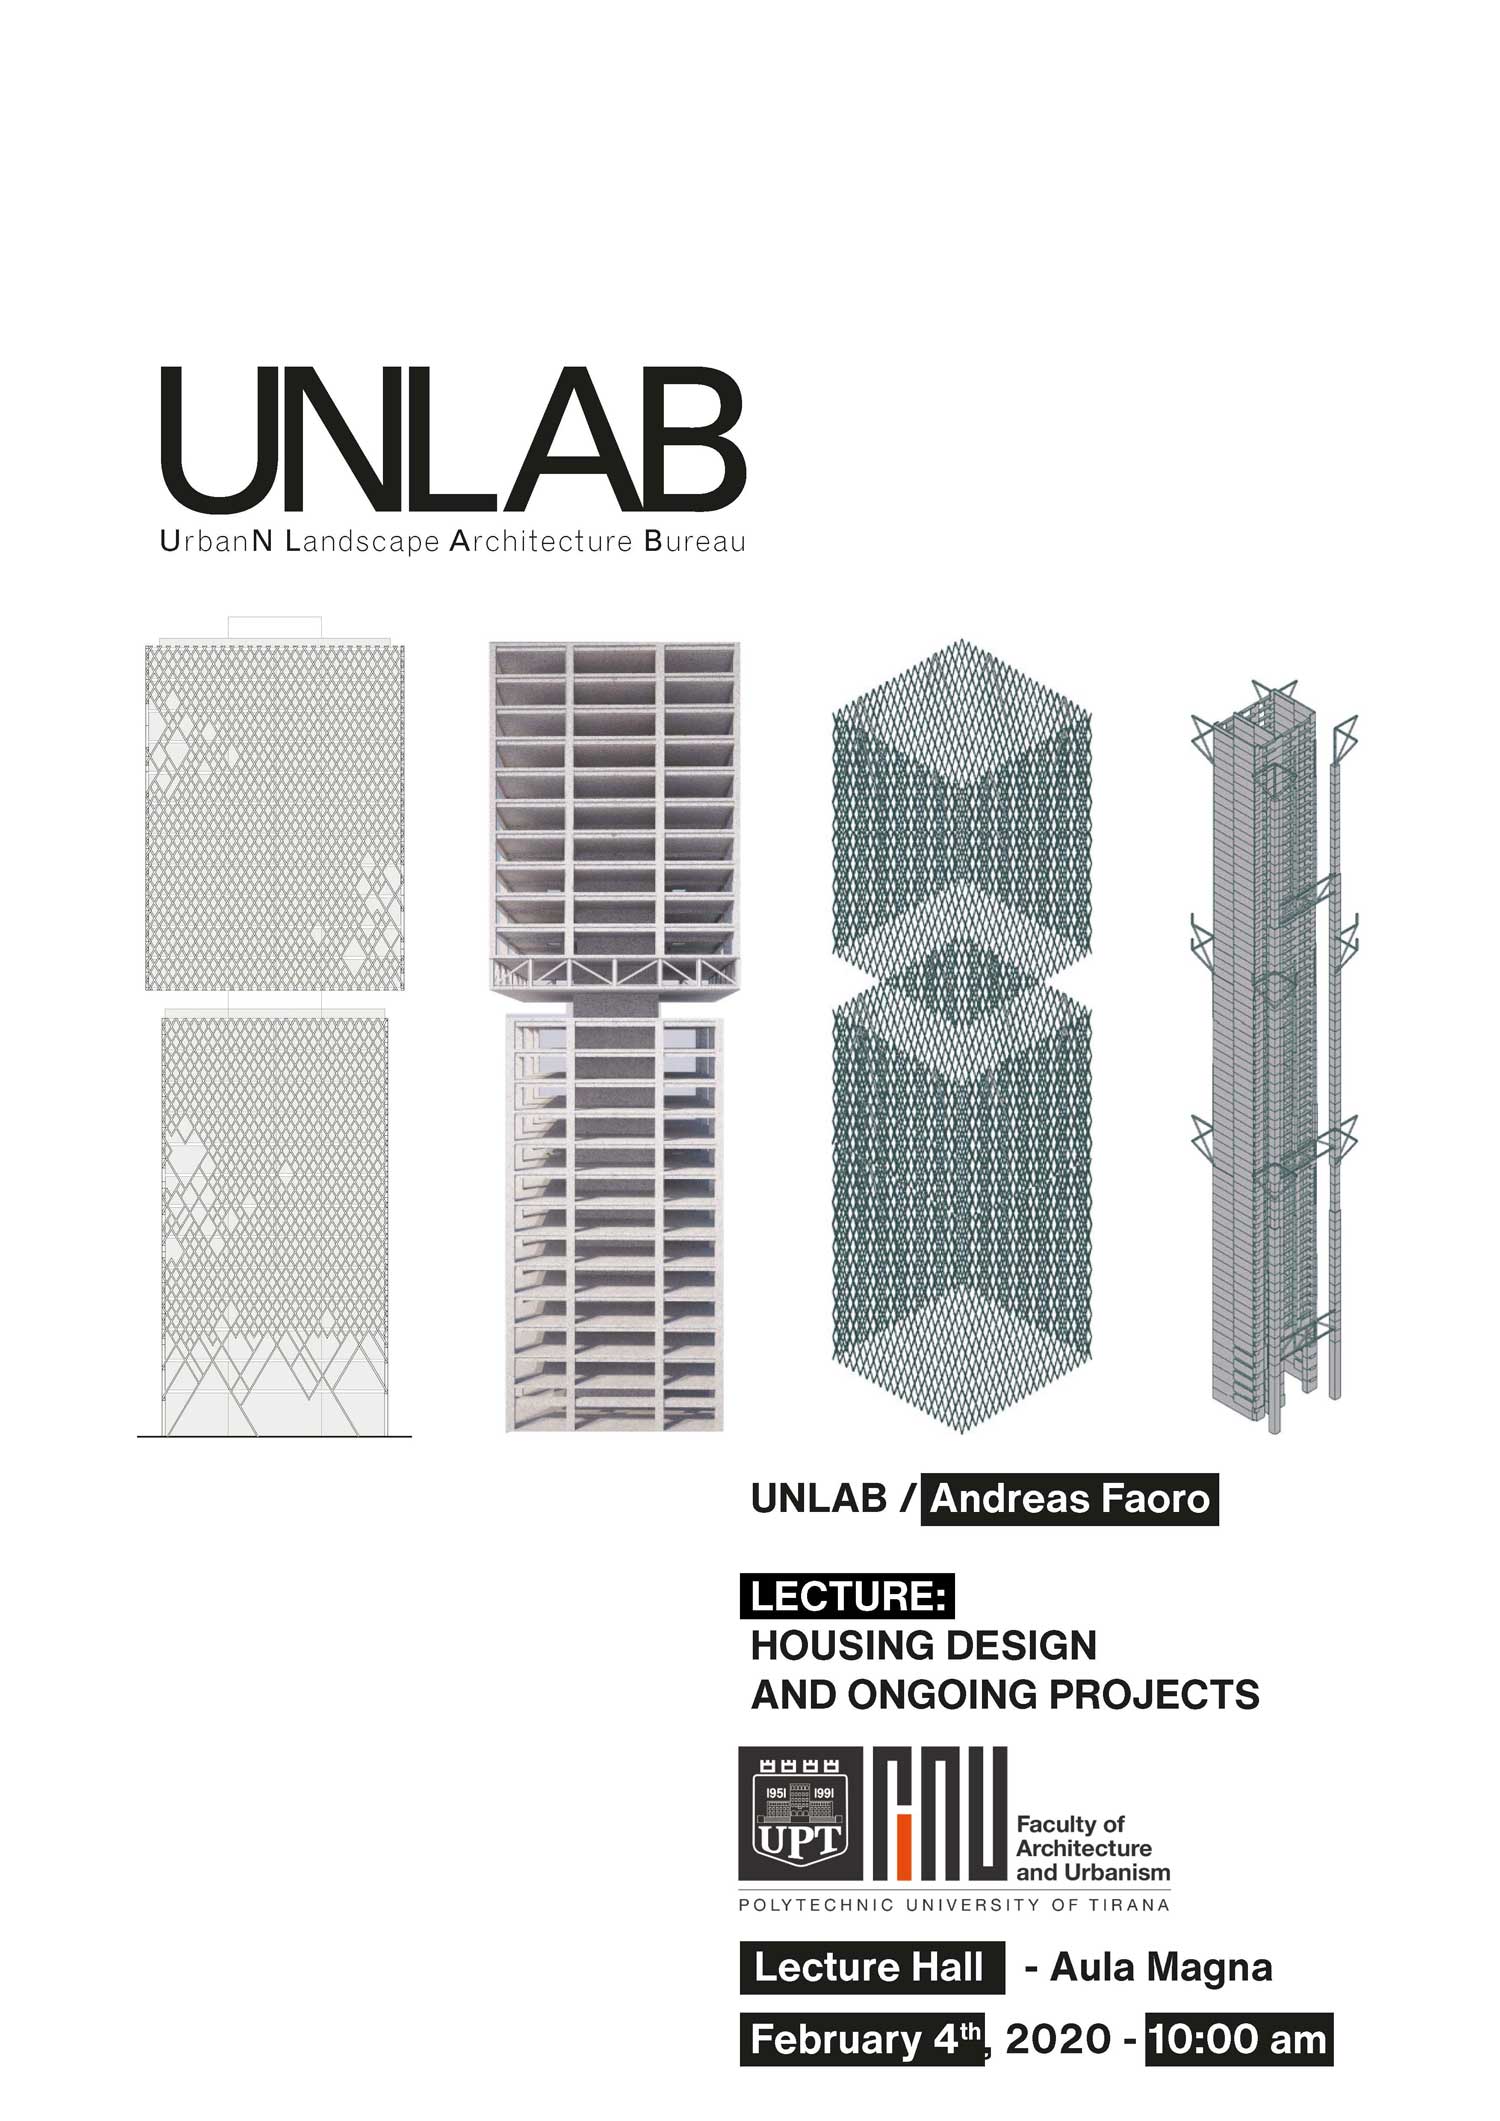 Lecture at the Polytechnic of Tirana, Faculty of Architecture (FAU)